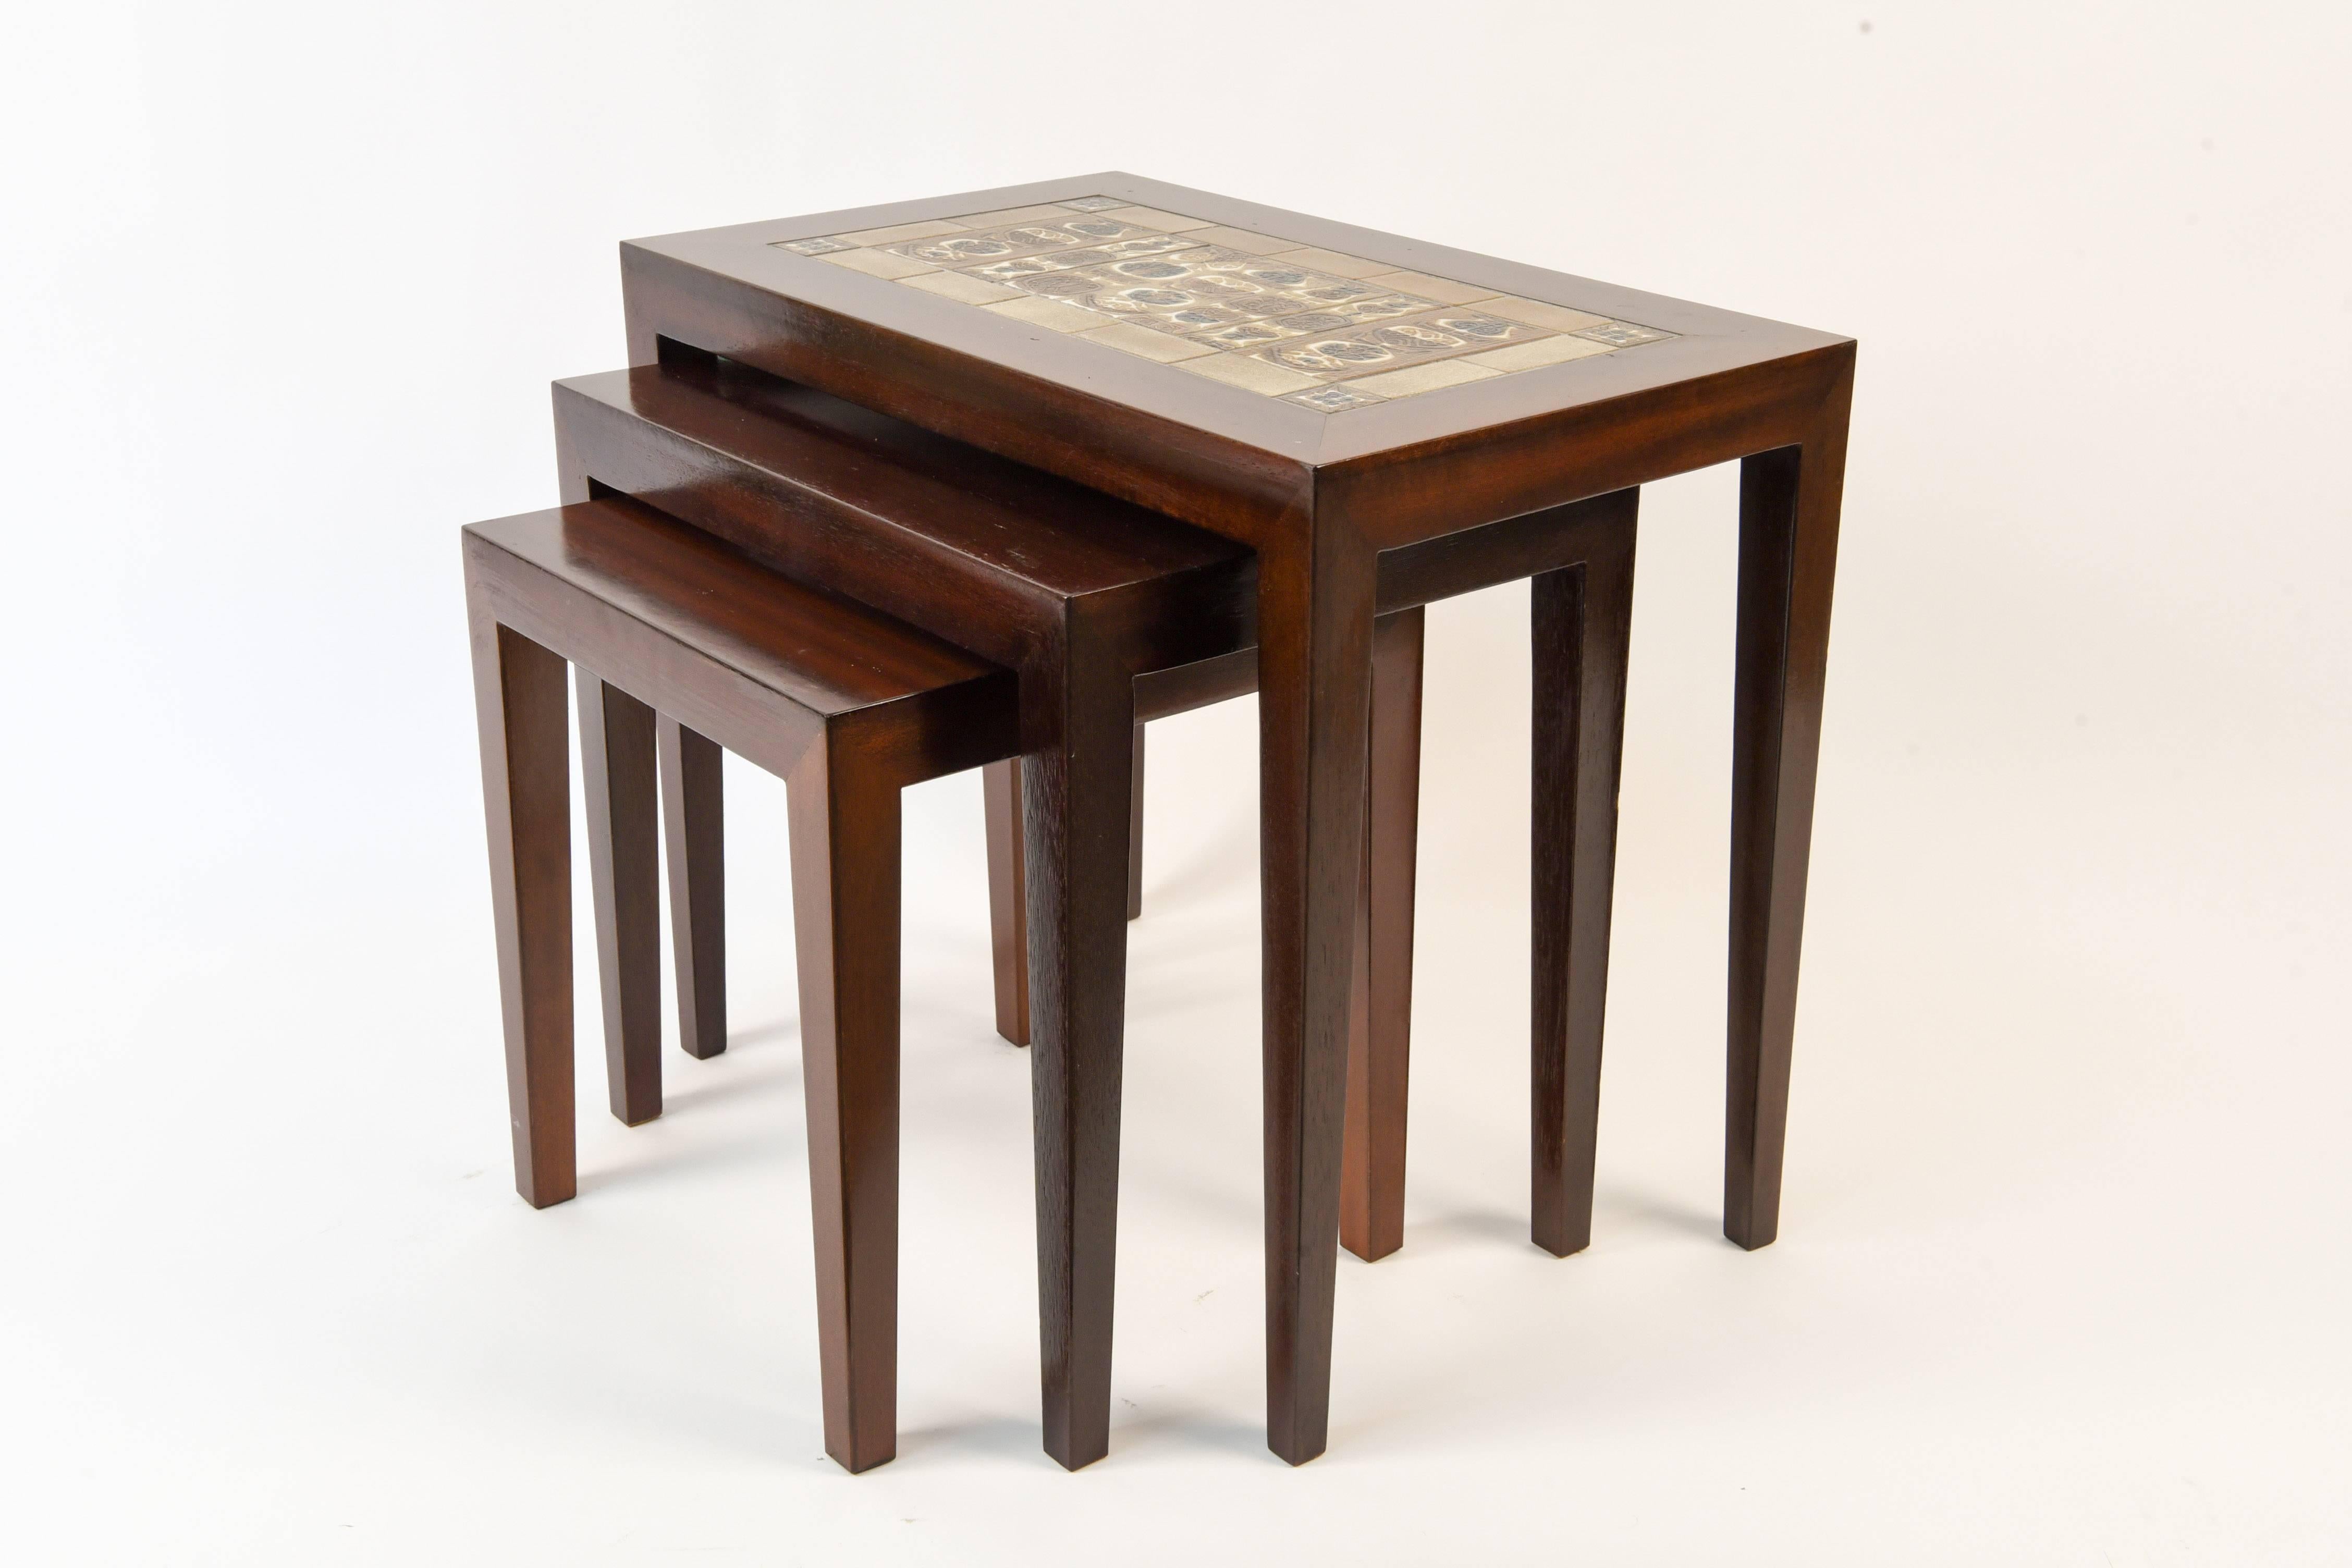 This set of three mahogany nesting tables features a tile top with tiles designed by Nils Thorsson for Royal Copenhagen as part of the Tenera series. Beautiful color to the mahogany wood, with a great artistic feature of the tiles.